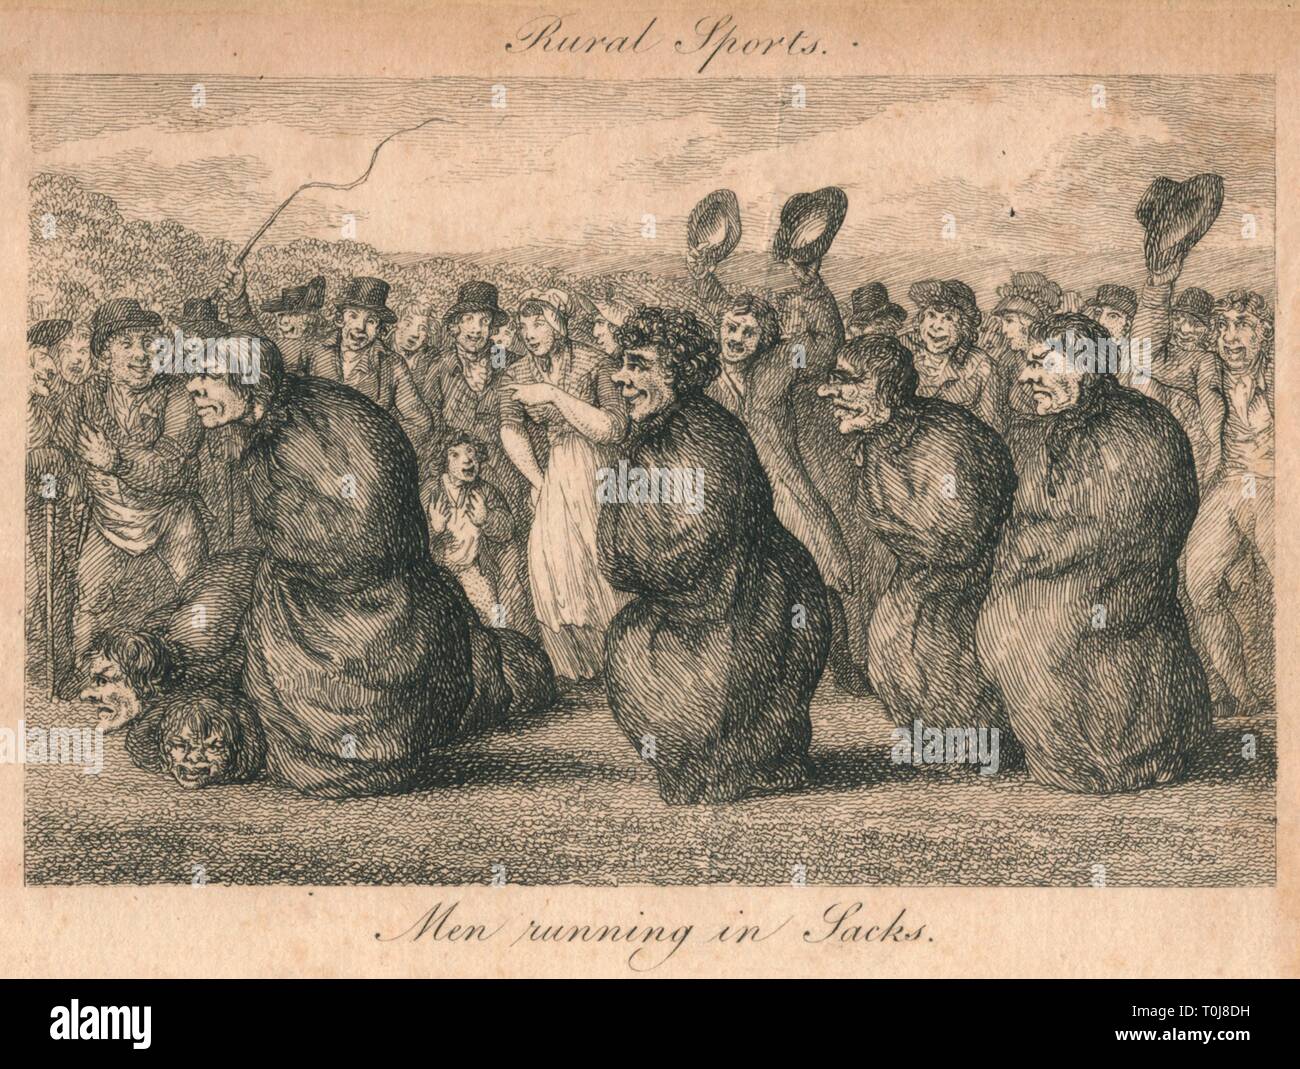 'Rural Sports - Men running in Sacks', late 18th-early 19th century. Creator: Unknown. Stock Photo